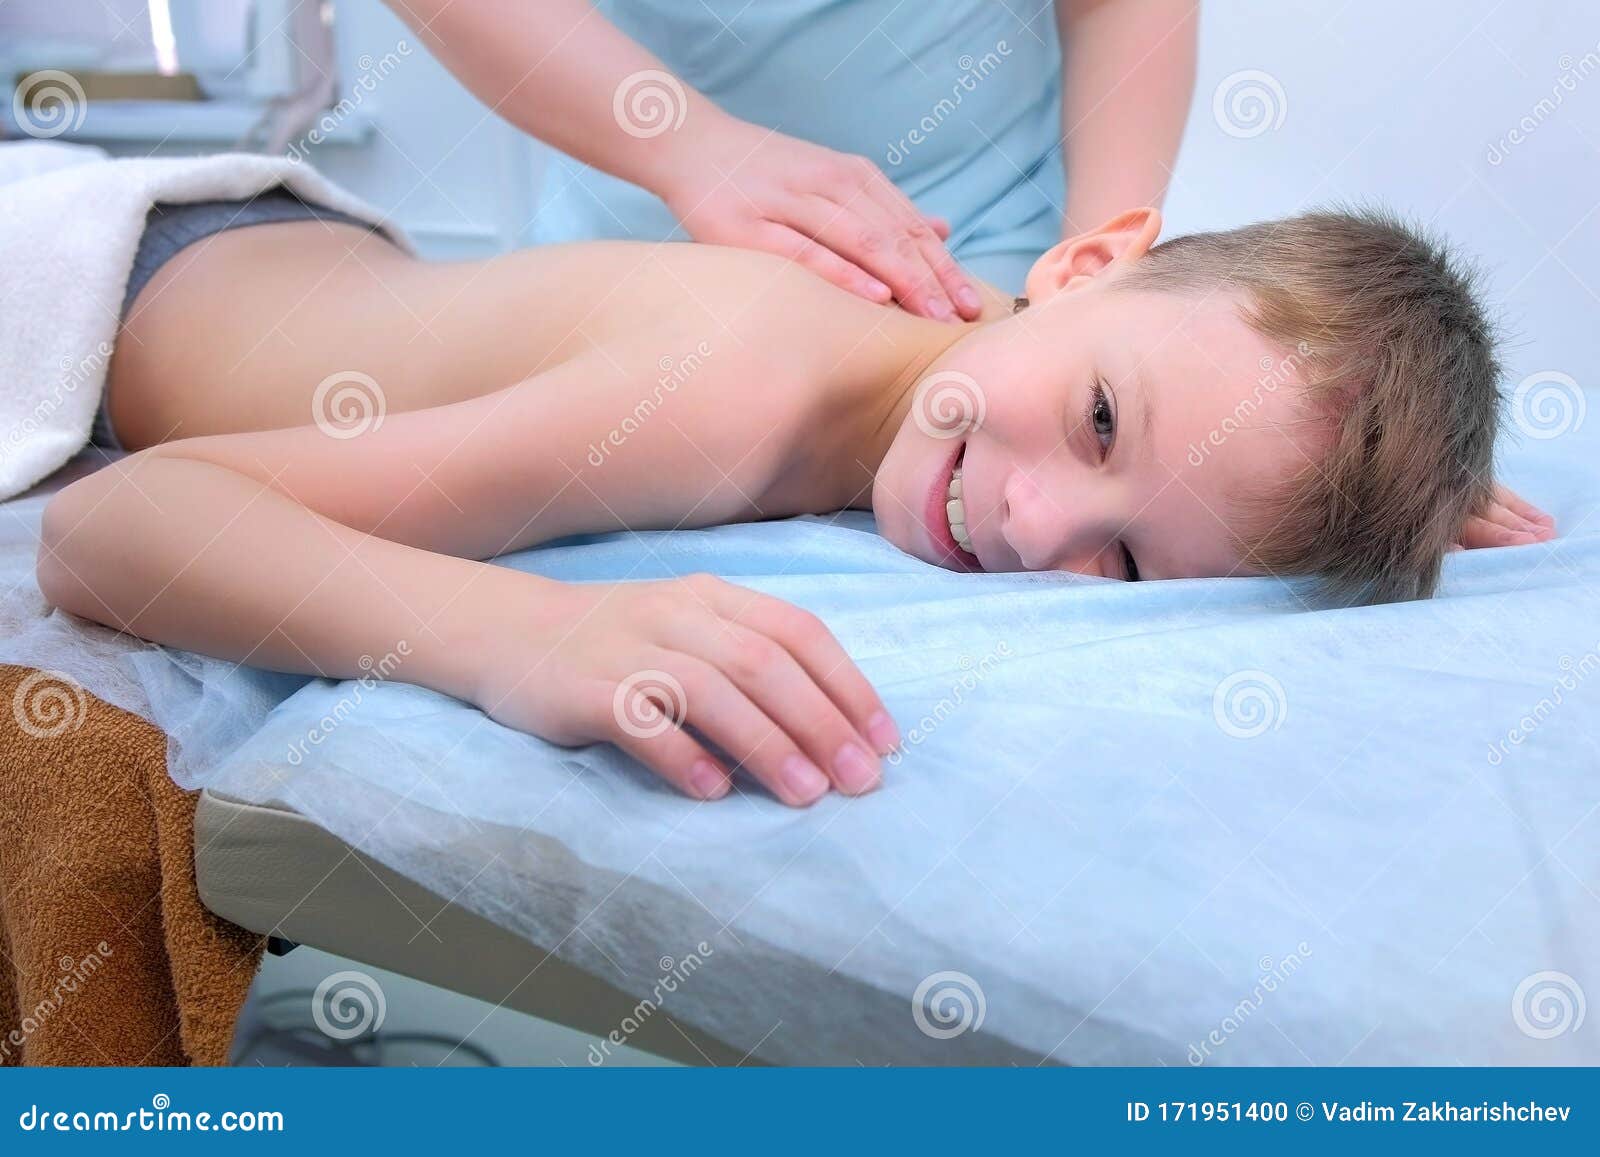 doctor massagist making therapeutic massage to teen boy on spine in clinic.